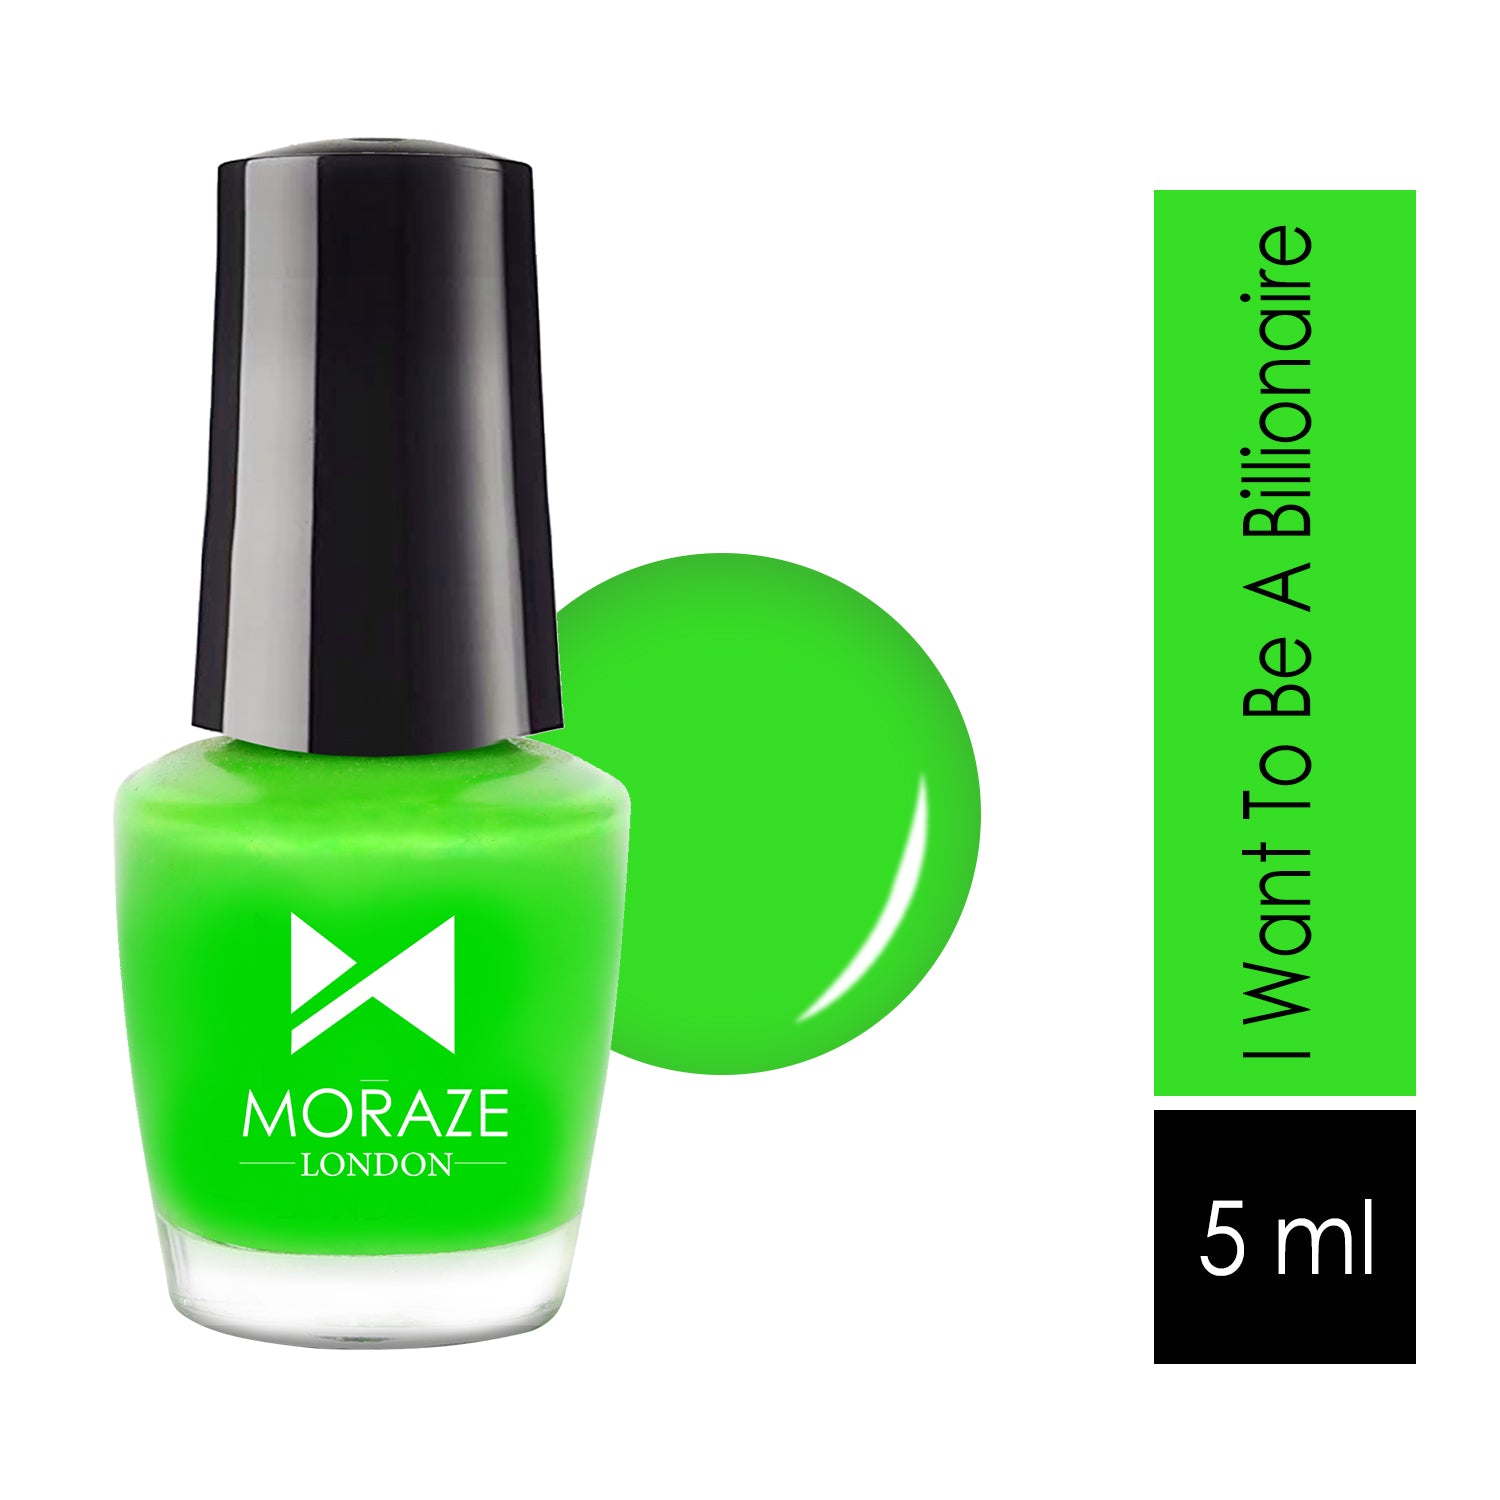 MI FASHION Parrot Green Nail Polish Transform Your Look with Subtle Glossy  Green Glamour Green - Price in India, Buy MI FASHION Parrot Green Nail  Polish Transform Your Look with Subtle Glossy